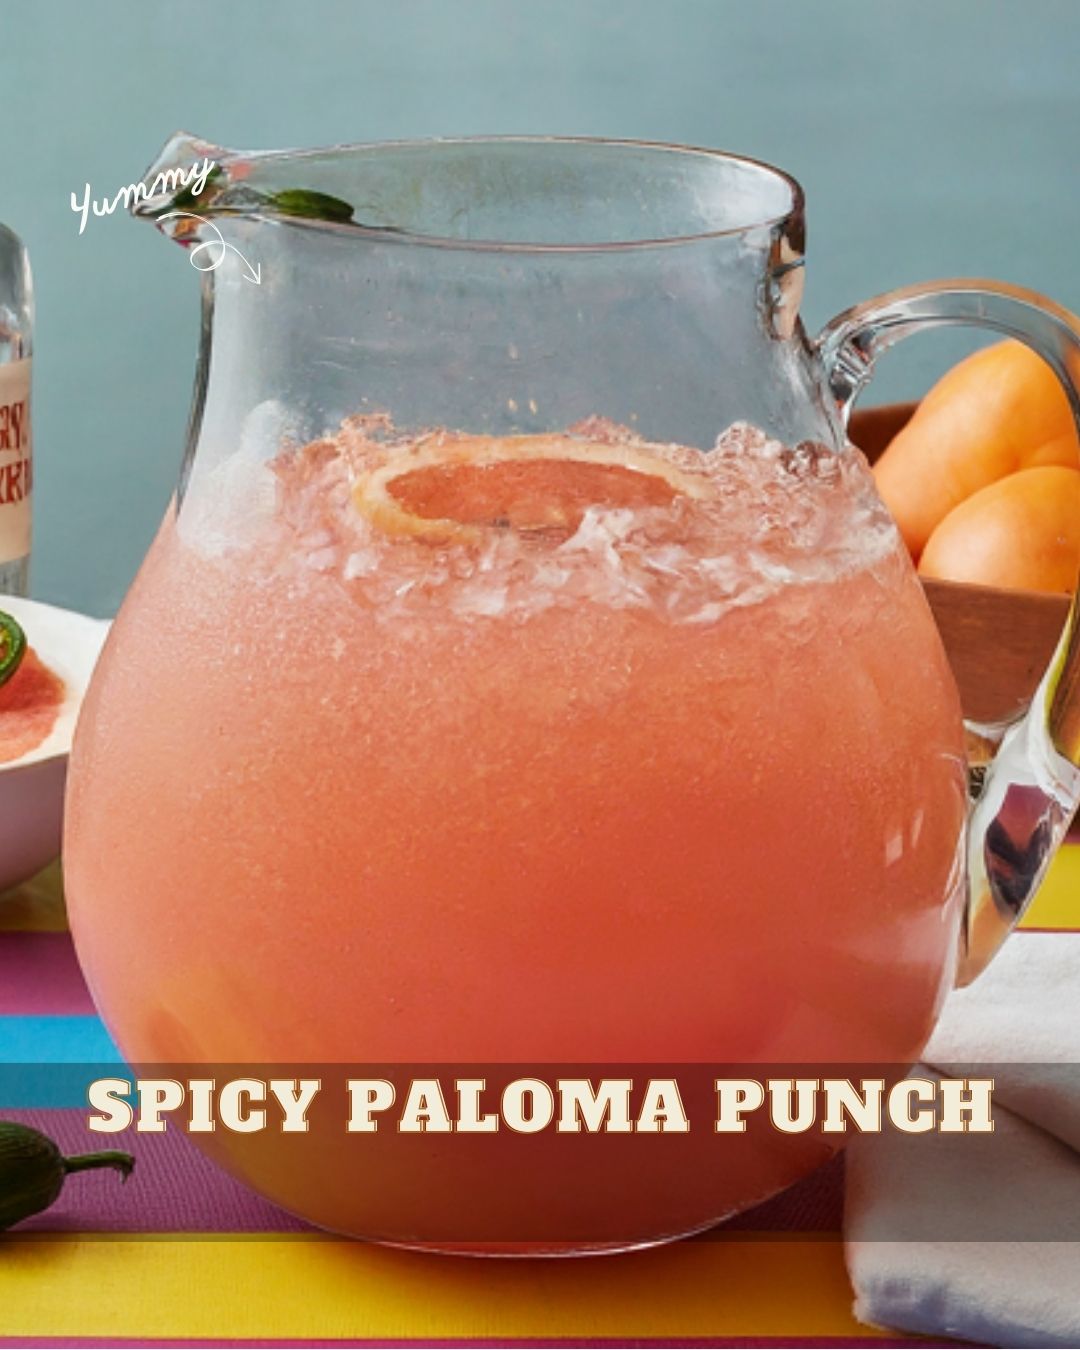 Spicy Paloma Punch